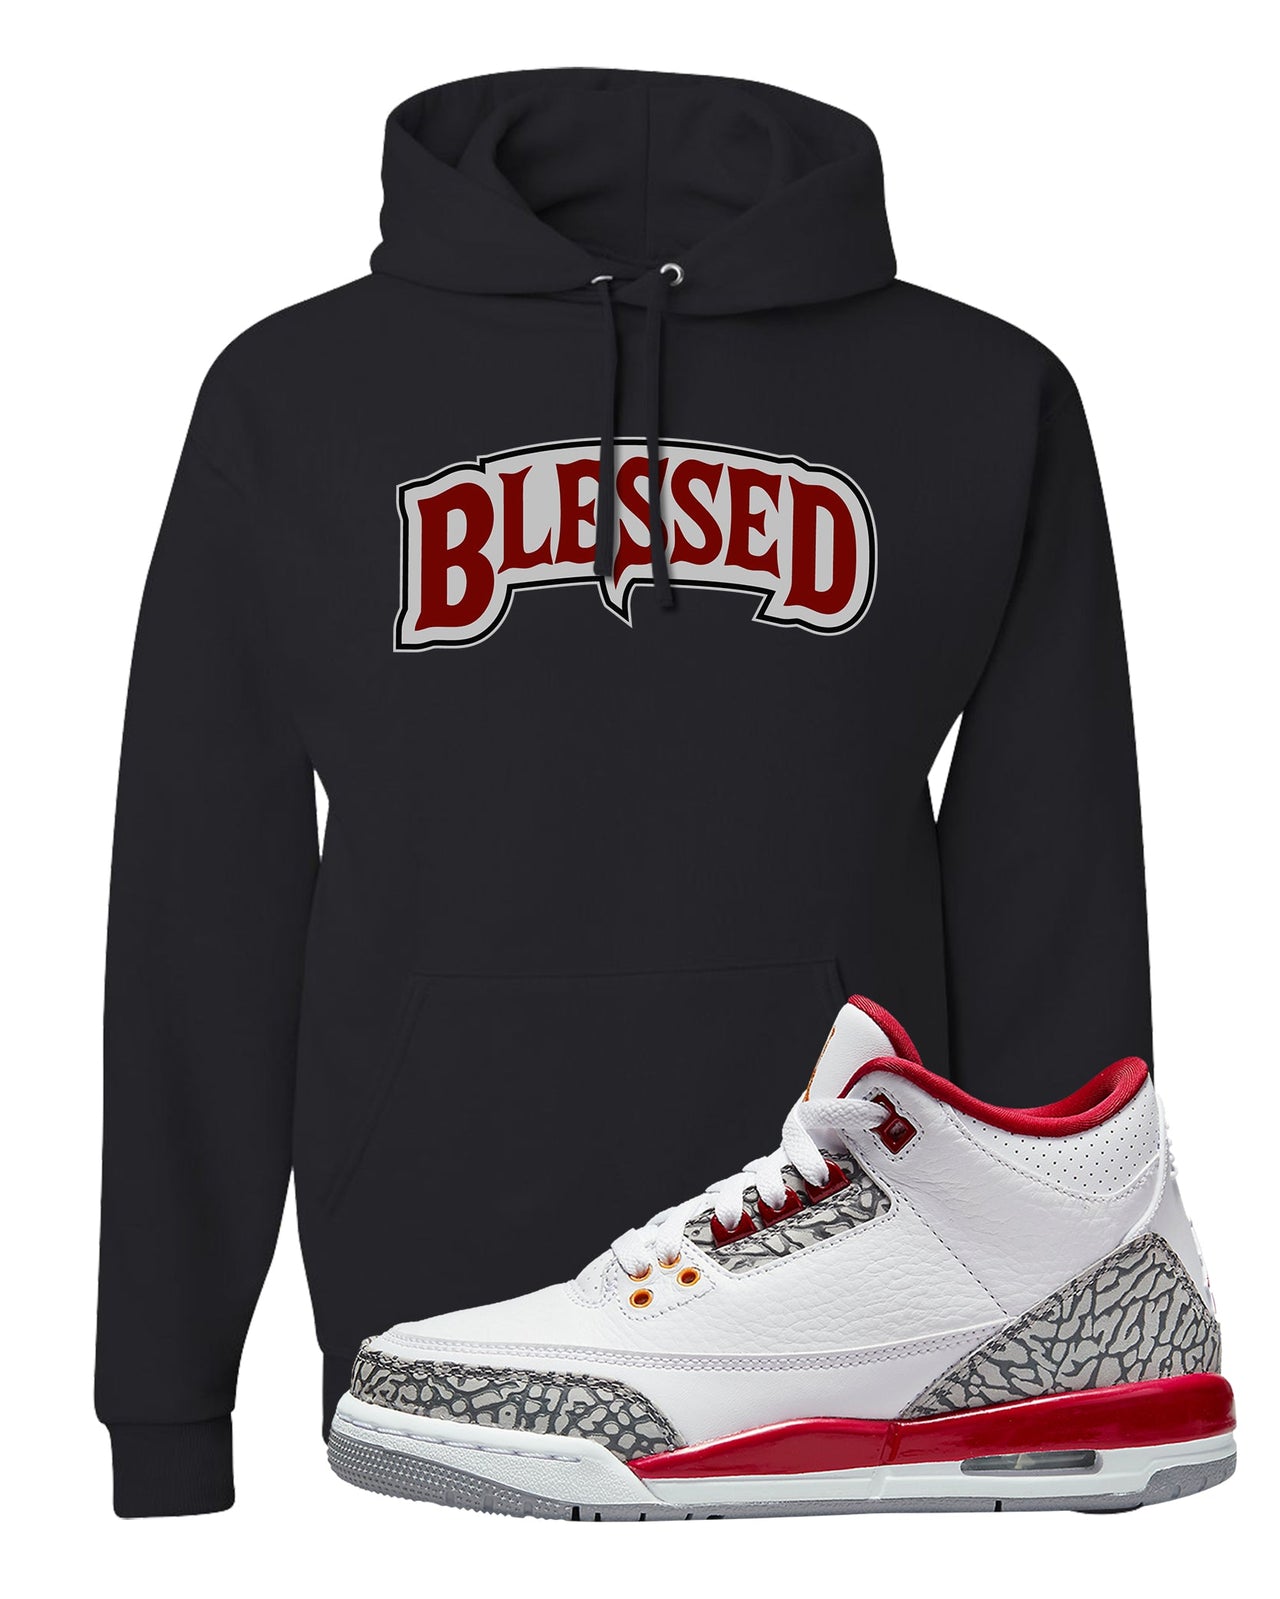 Cardinal Red 3s Hoodie | Blessed Arch, Black